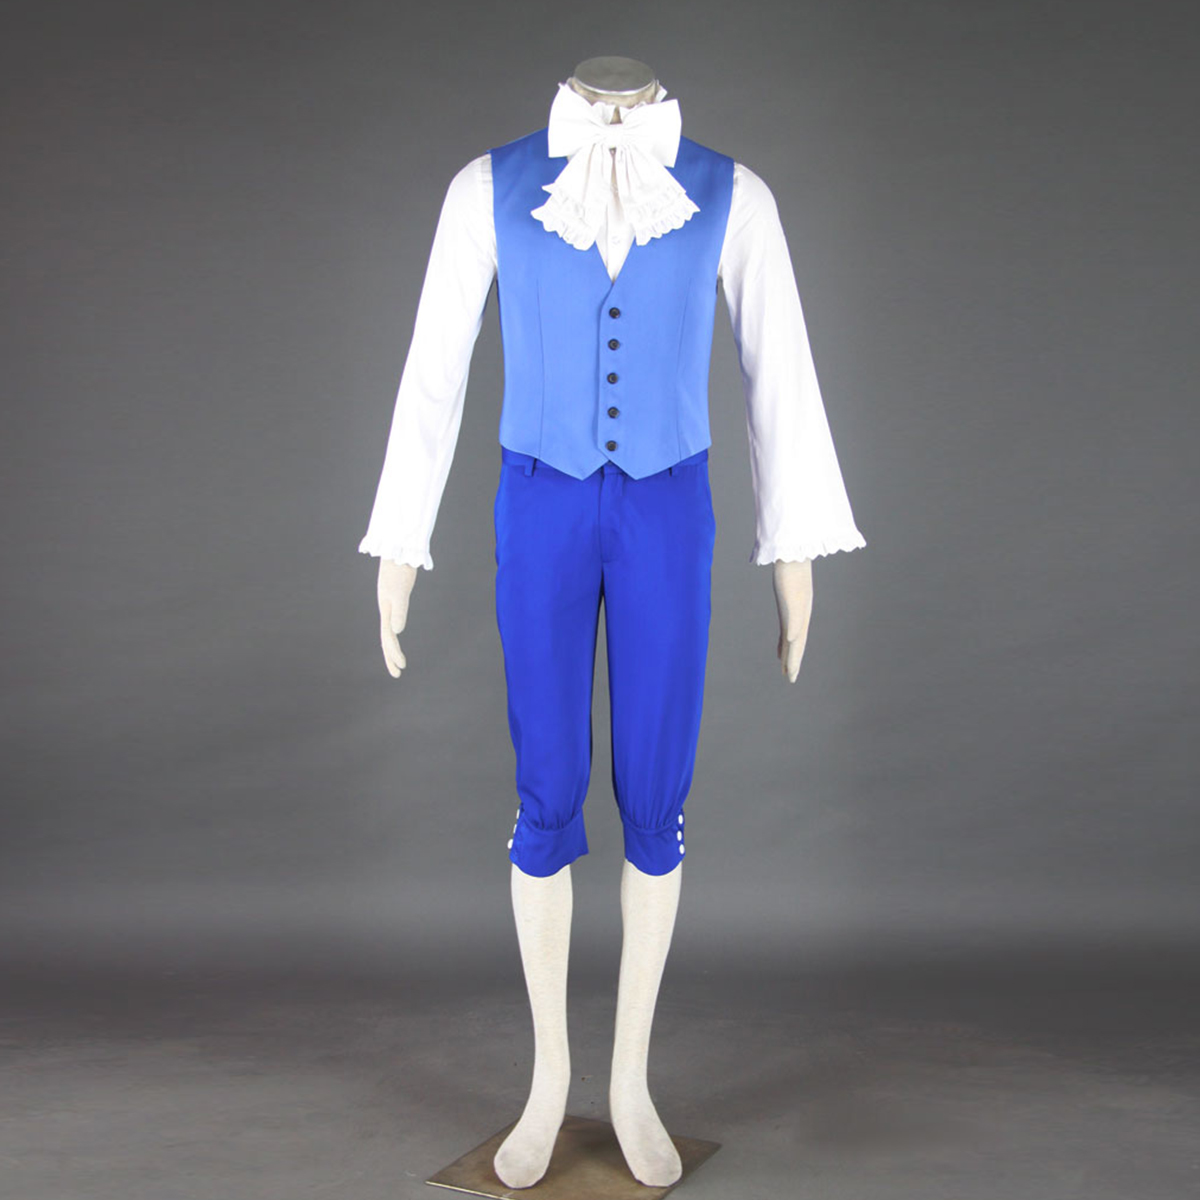 Black Butler Ciel Phantomhive 18 Anime Cosplay Costumes Outfit